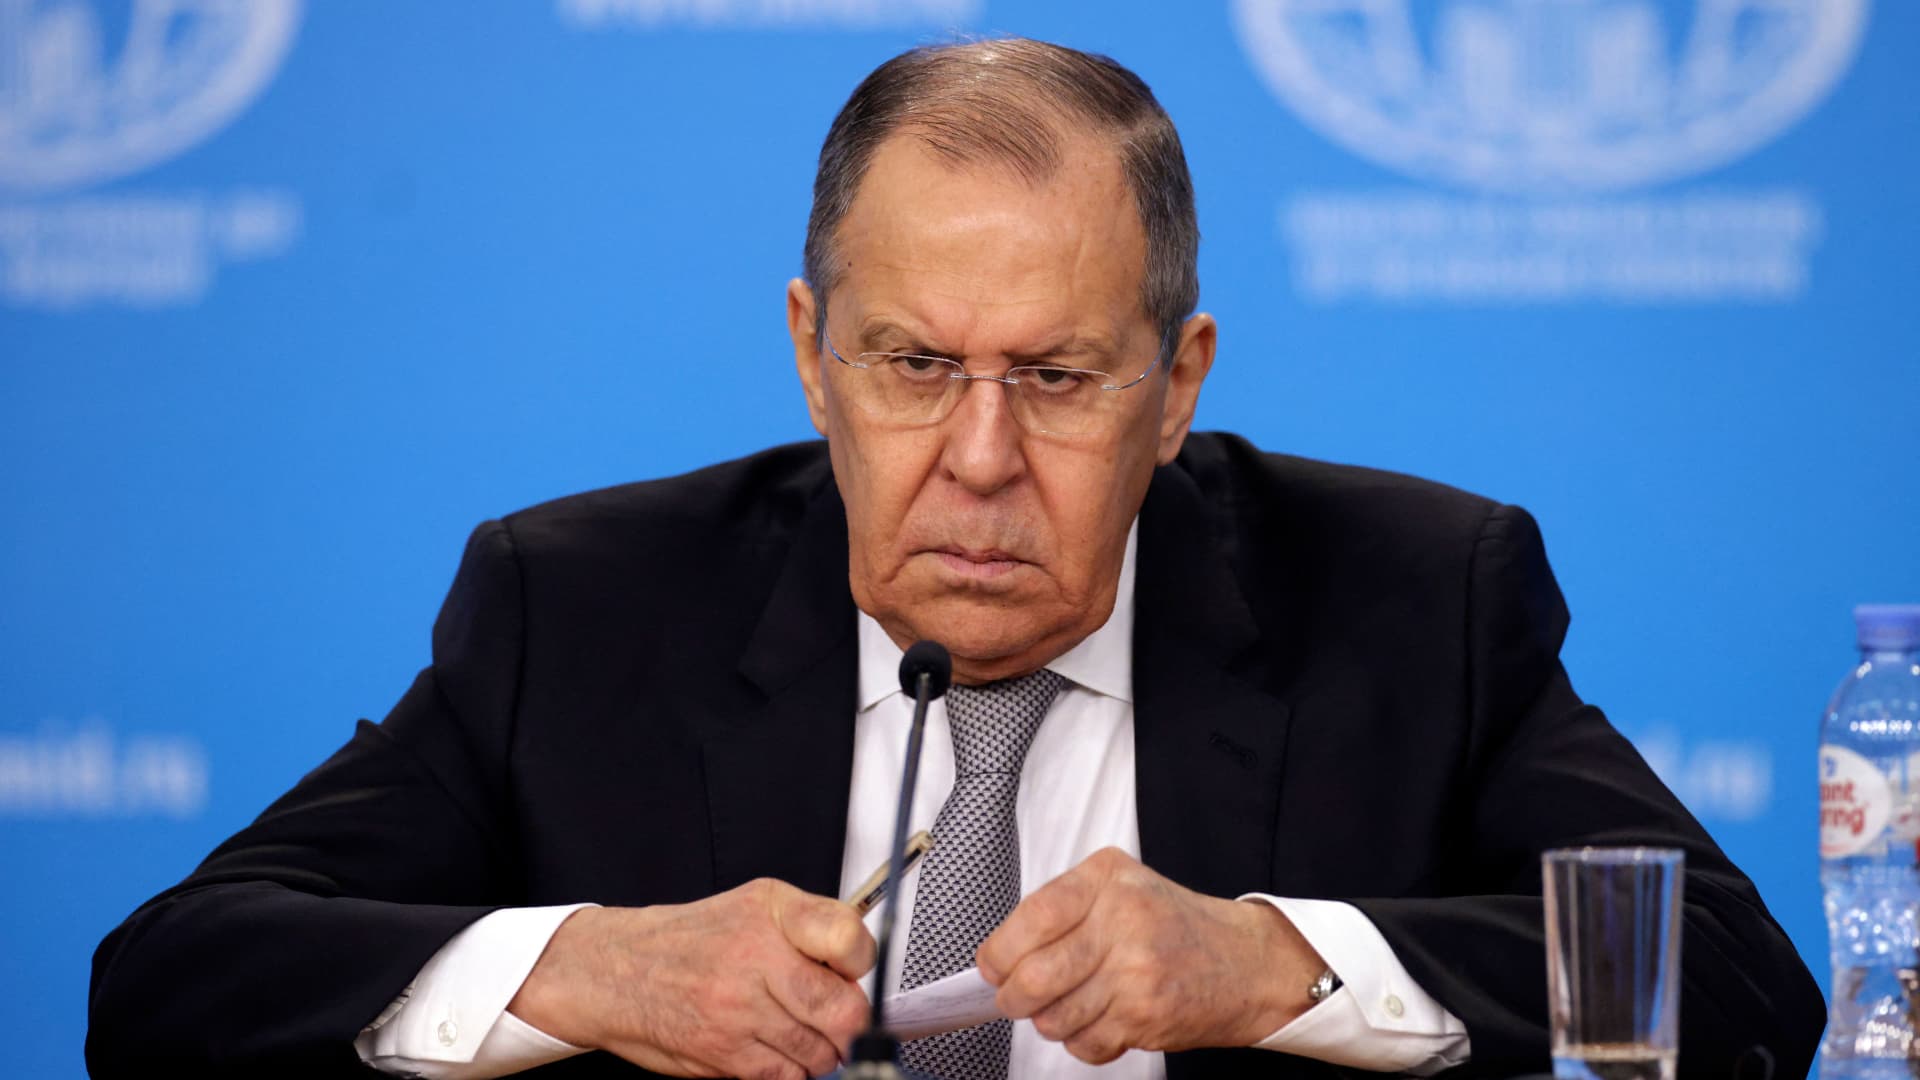 Russia's Foreign Minister Sergei Lavrov says Moscow is not at war with NATO, but that NATO sees itself as being at war with the Kremlin.